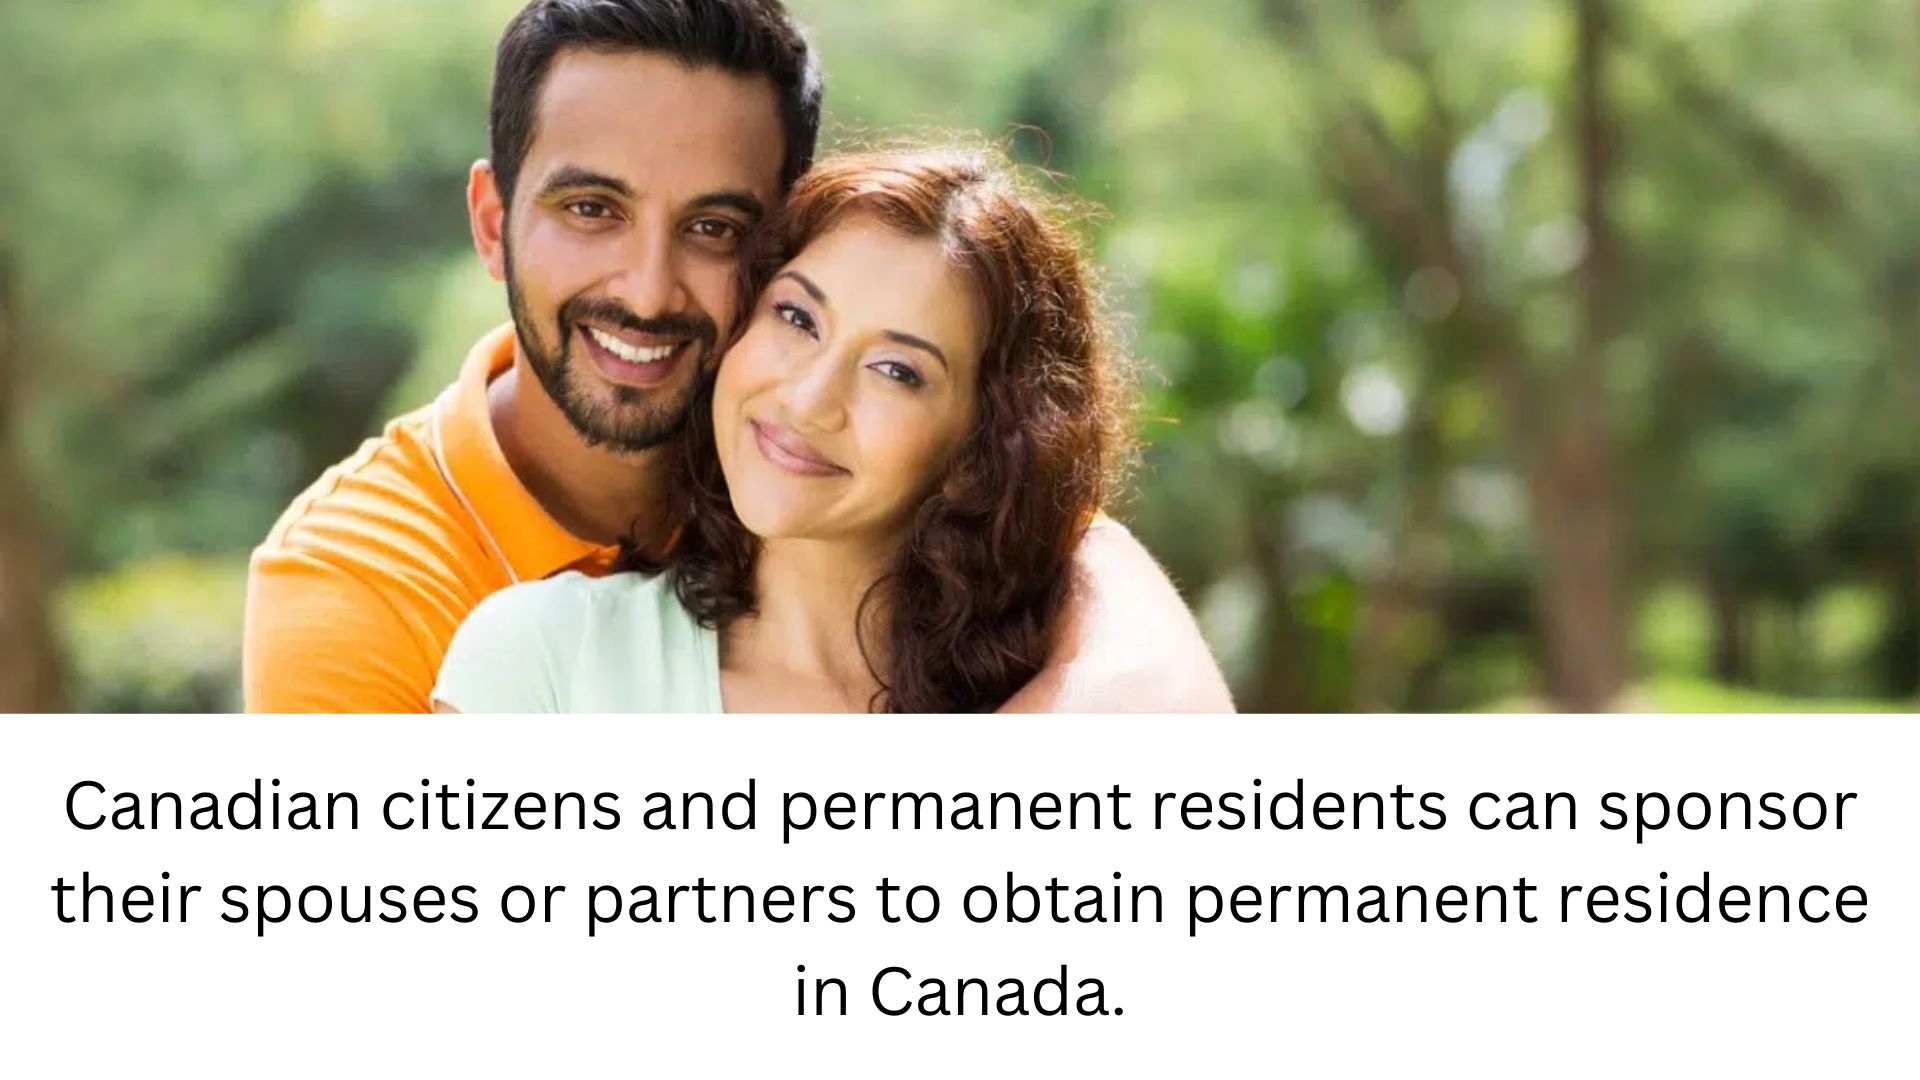 Canadian citizens and permanent residents